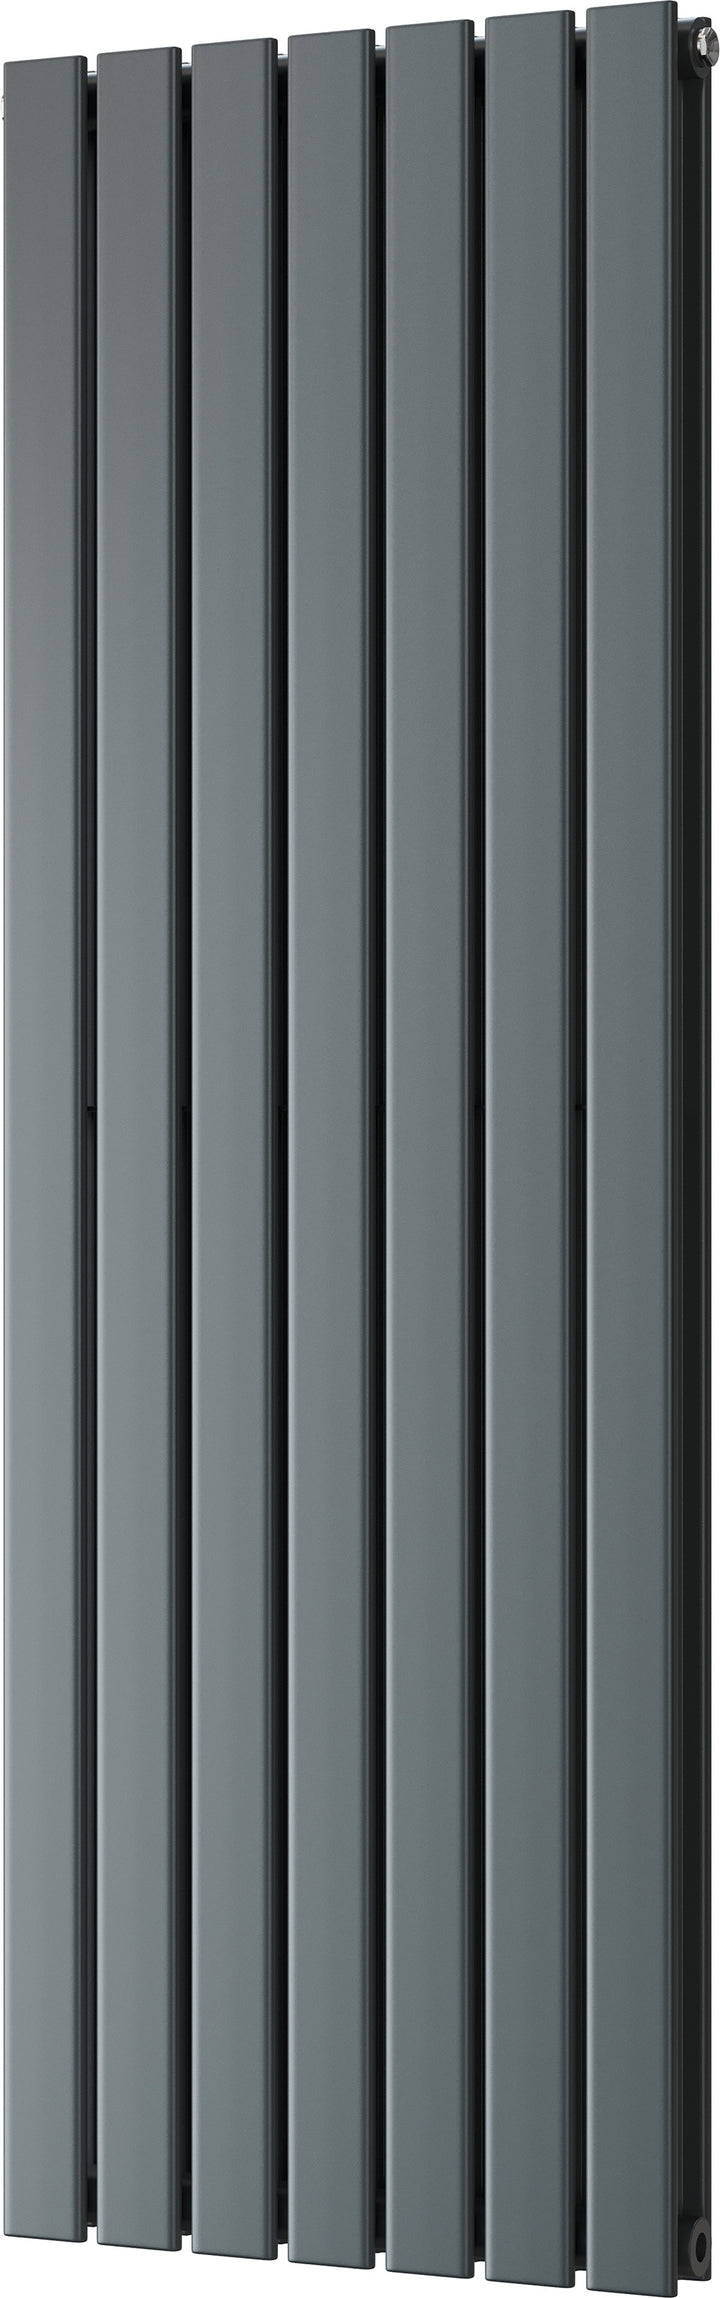 Typhoon - Anthracite Vertical Radiator H1400mm x W476mm Double Panel